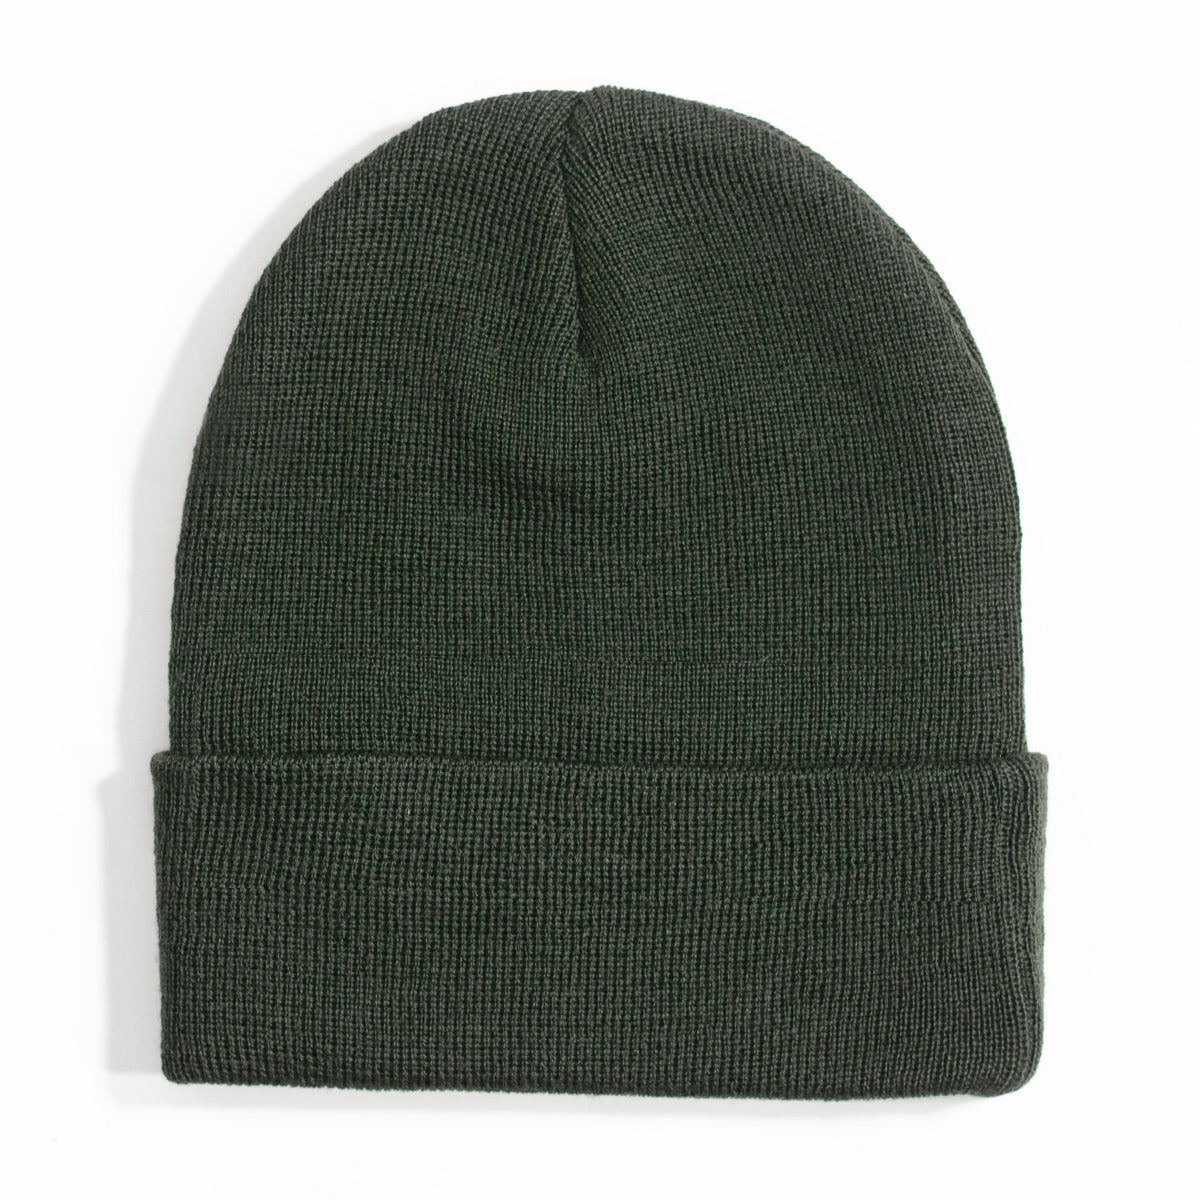 Lost Art Canada - green wool winter toque back view